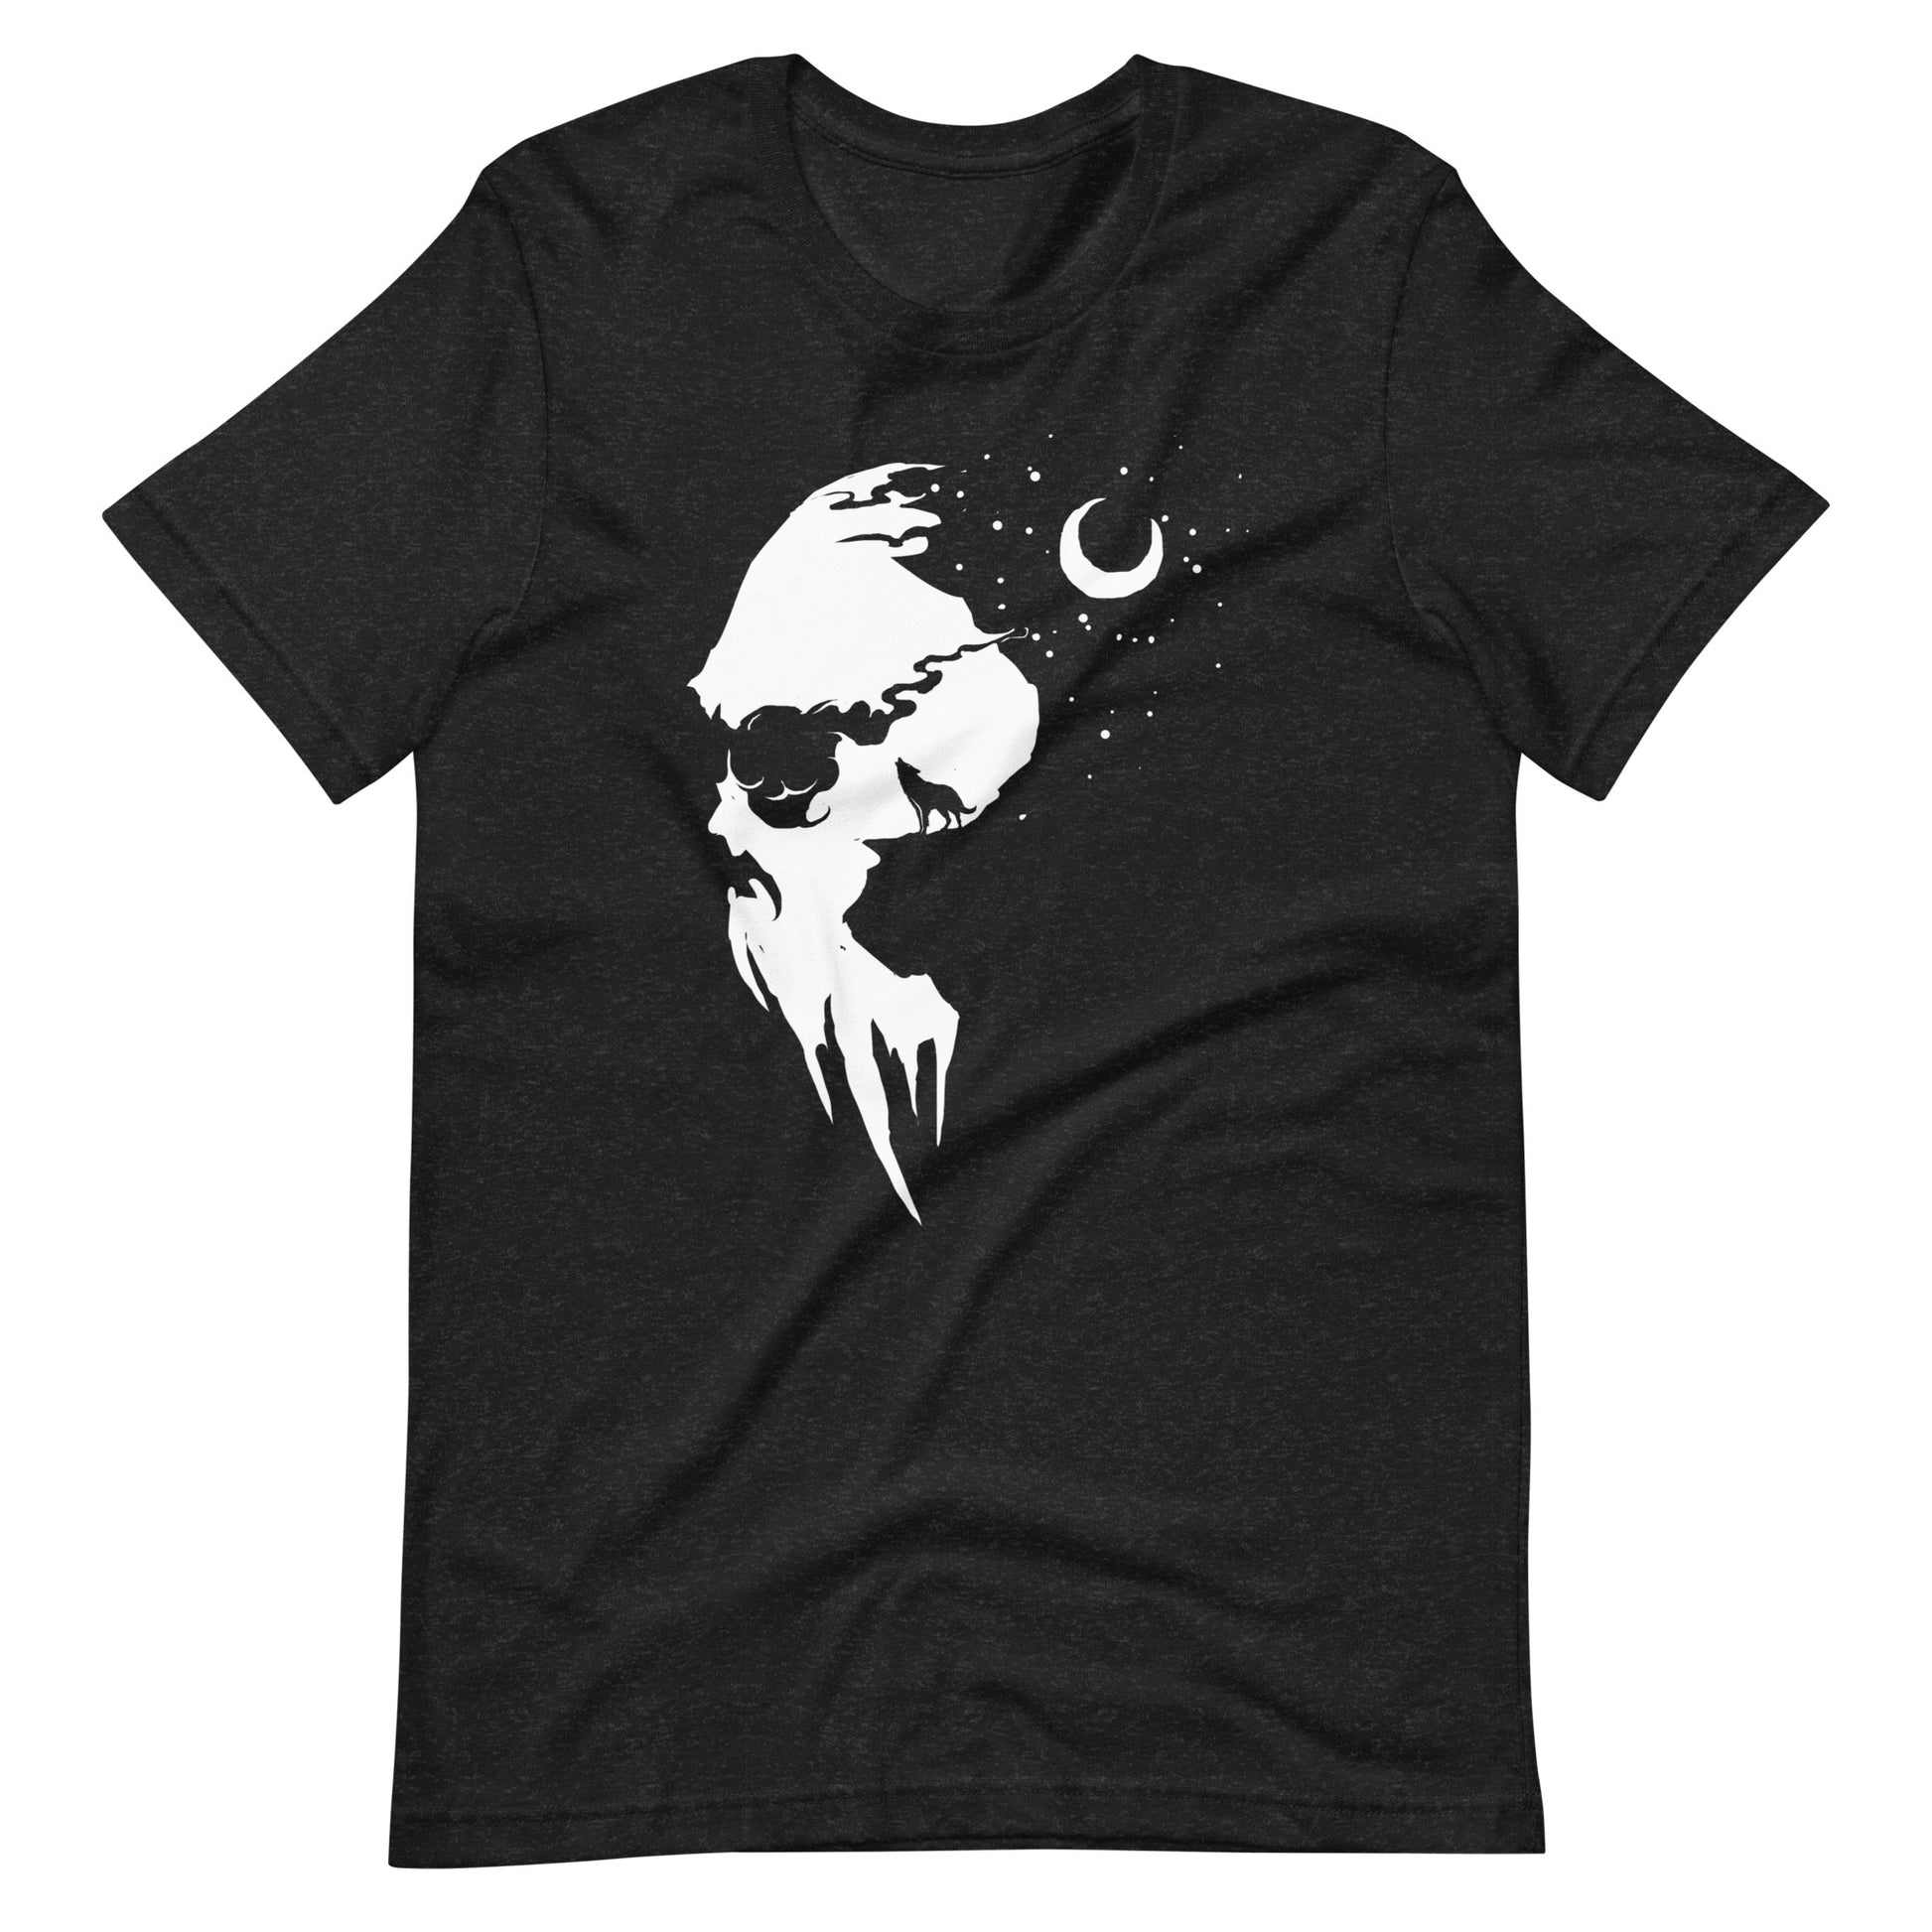 The Night Has Come - Men's t-shirt - Black Heather Front